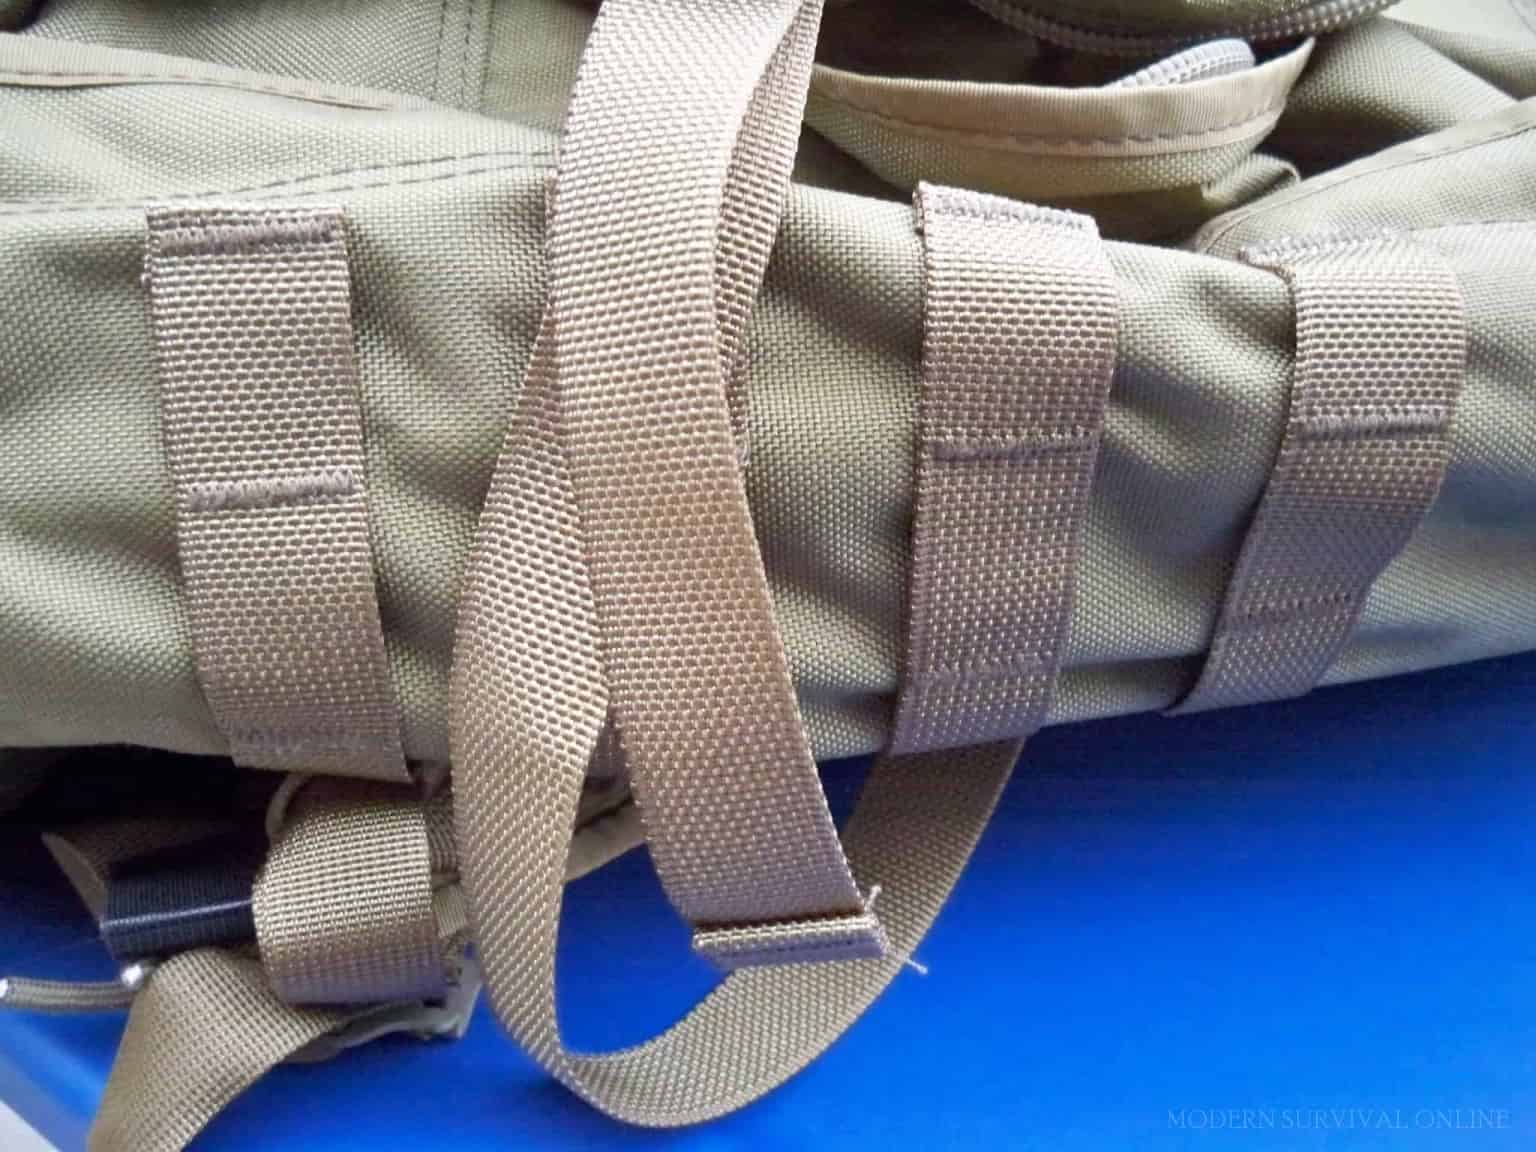 Paladin Mission Pack Expedition MOLLE attachments